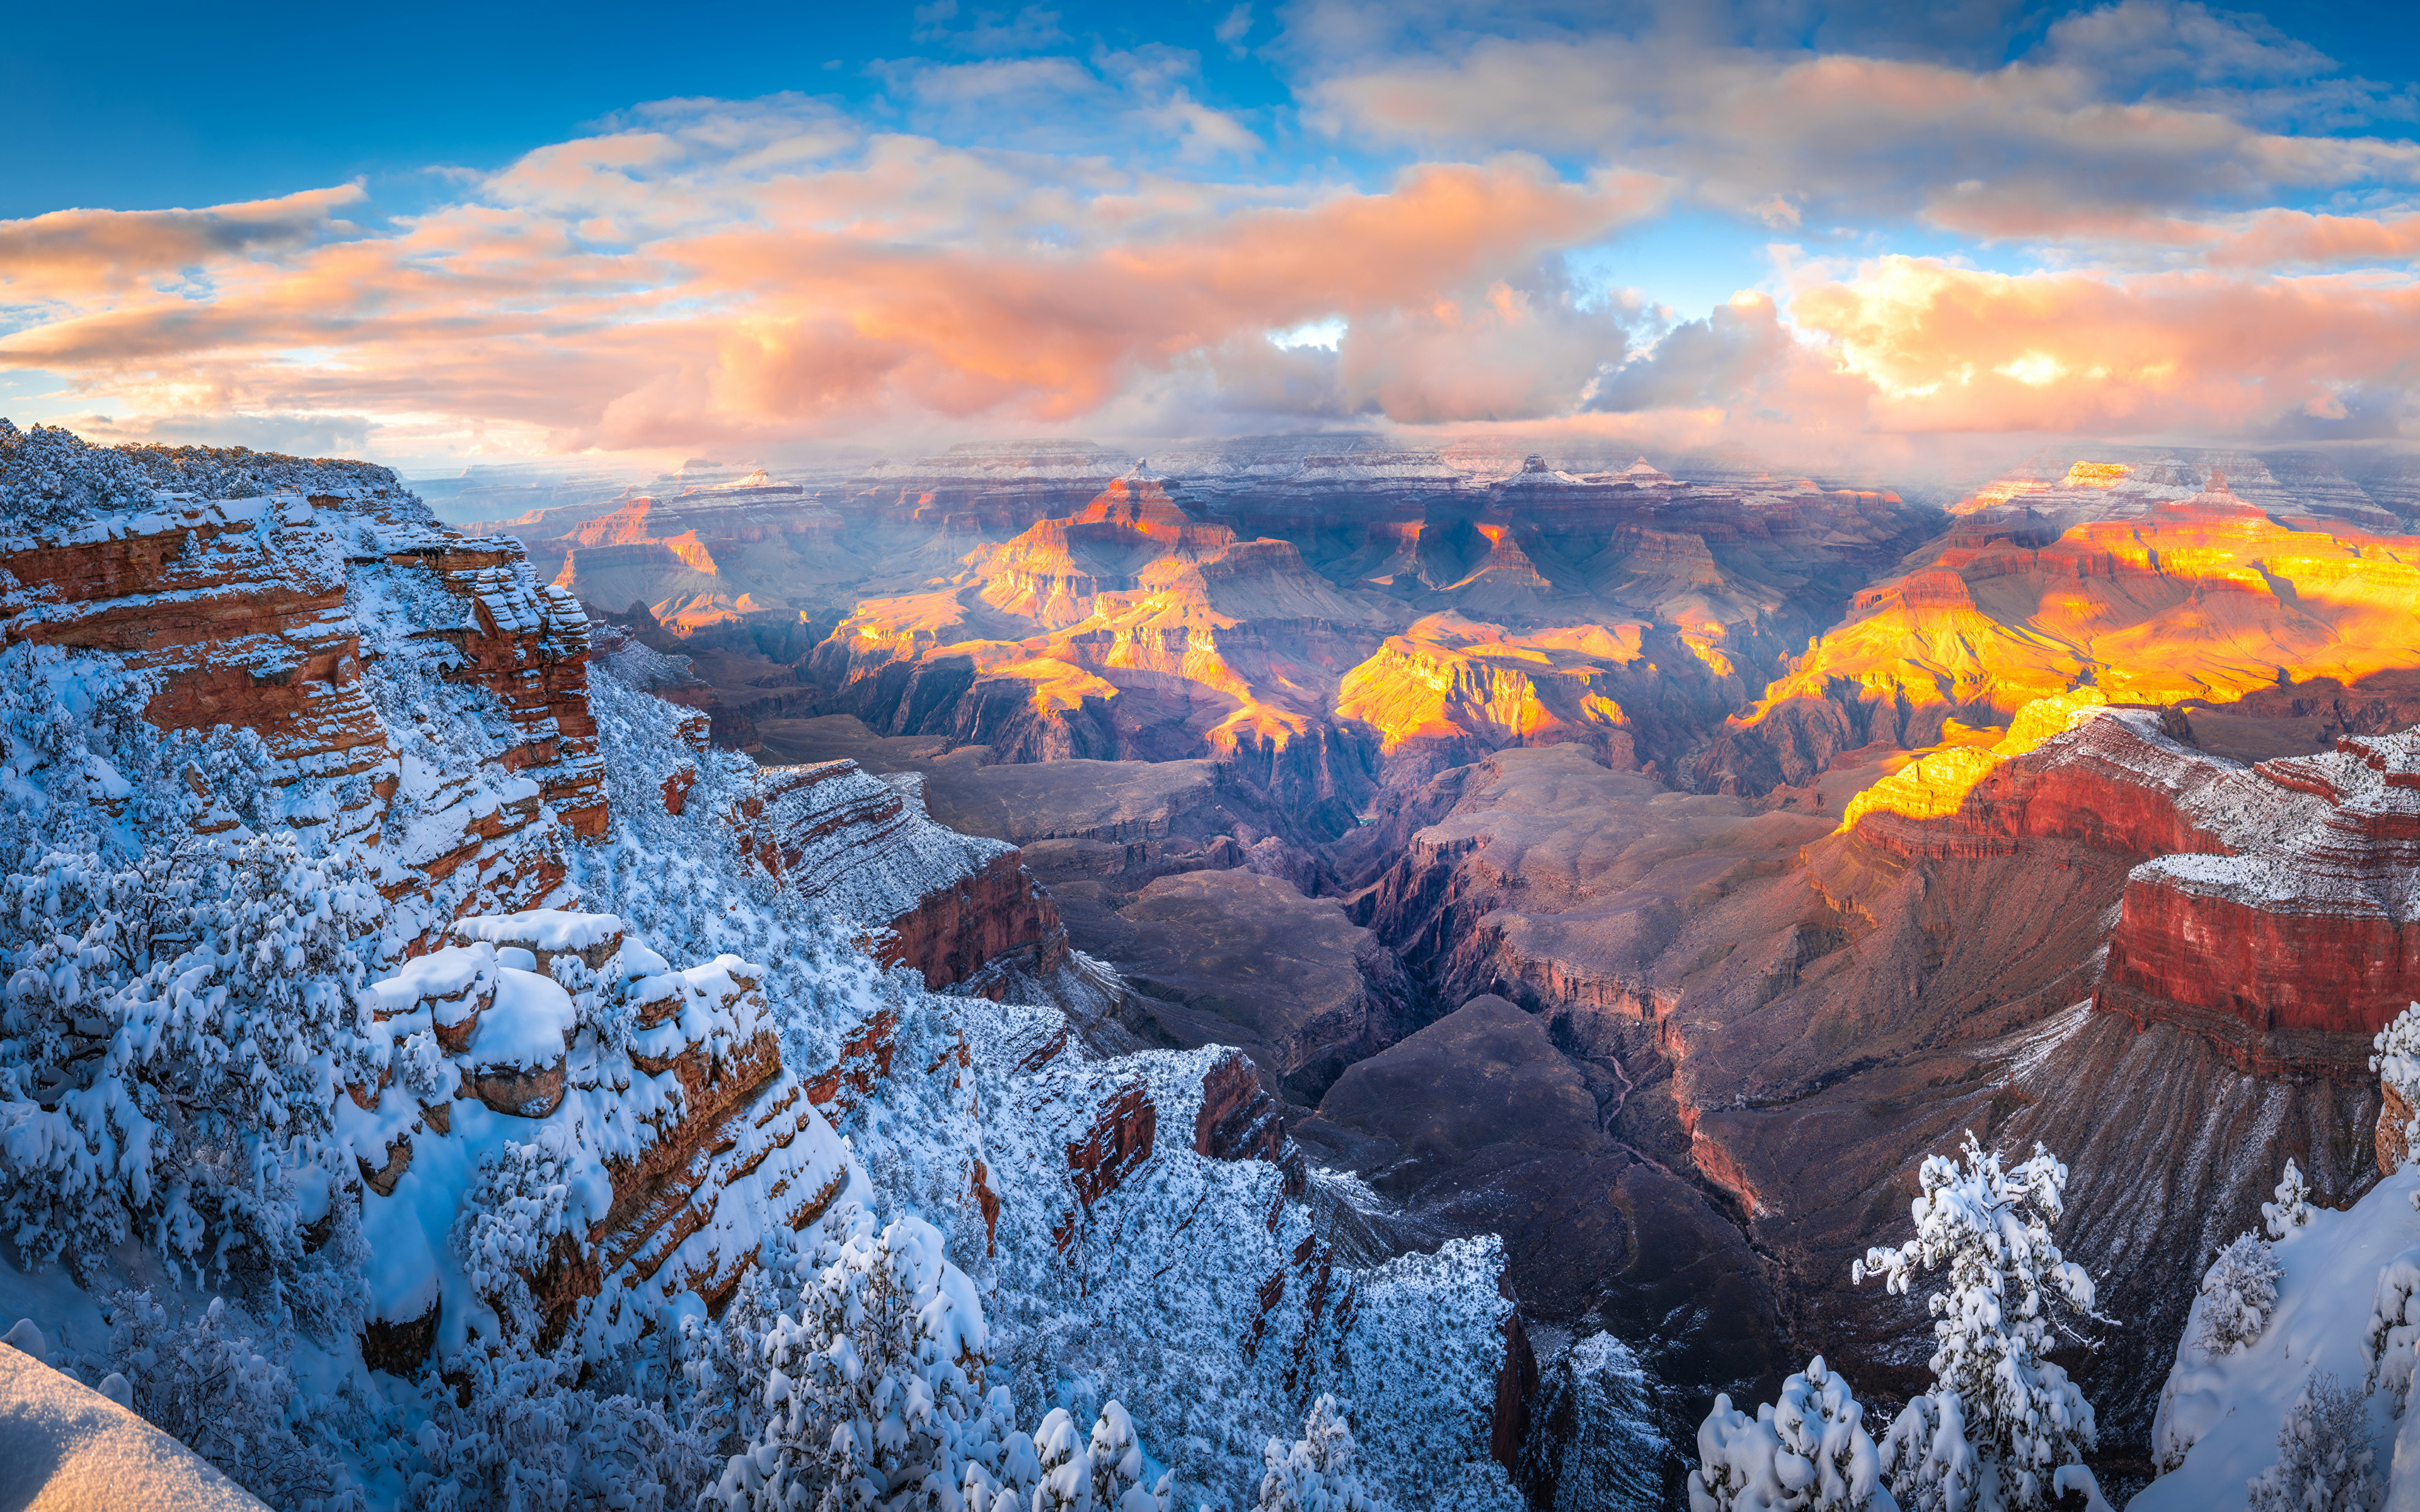 Download wallpaper 4k, Grand Canyon, winter, rocks, Arizona, beautiful nature, USA, America, canyon, american landmarks for desktop with resolution 3840x2400. High Quality HD picture wallpaper